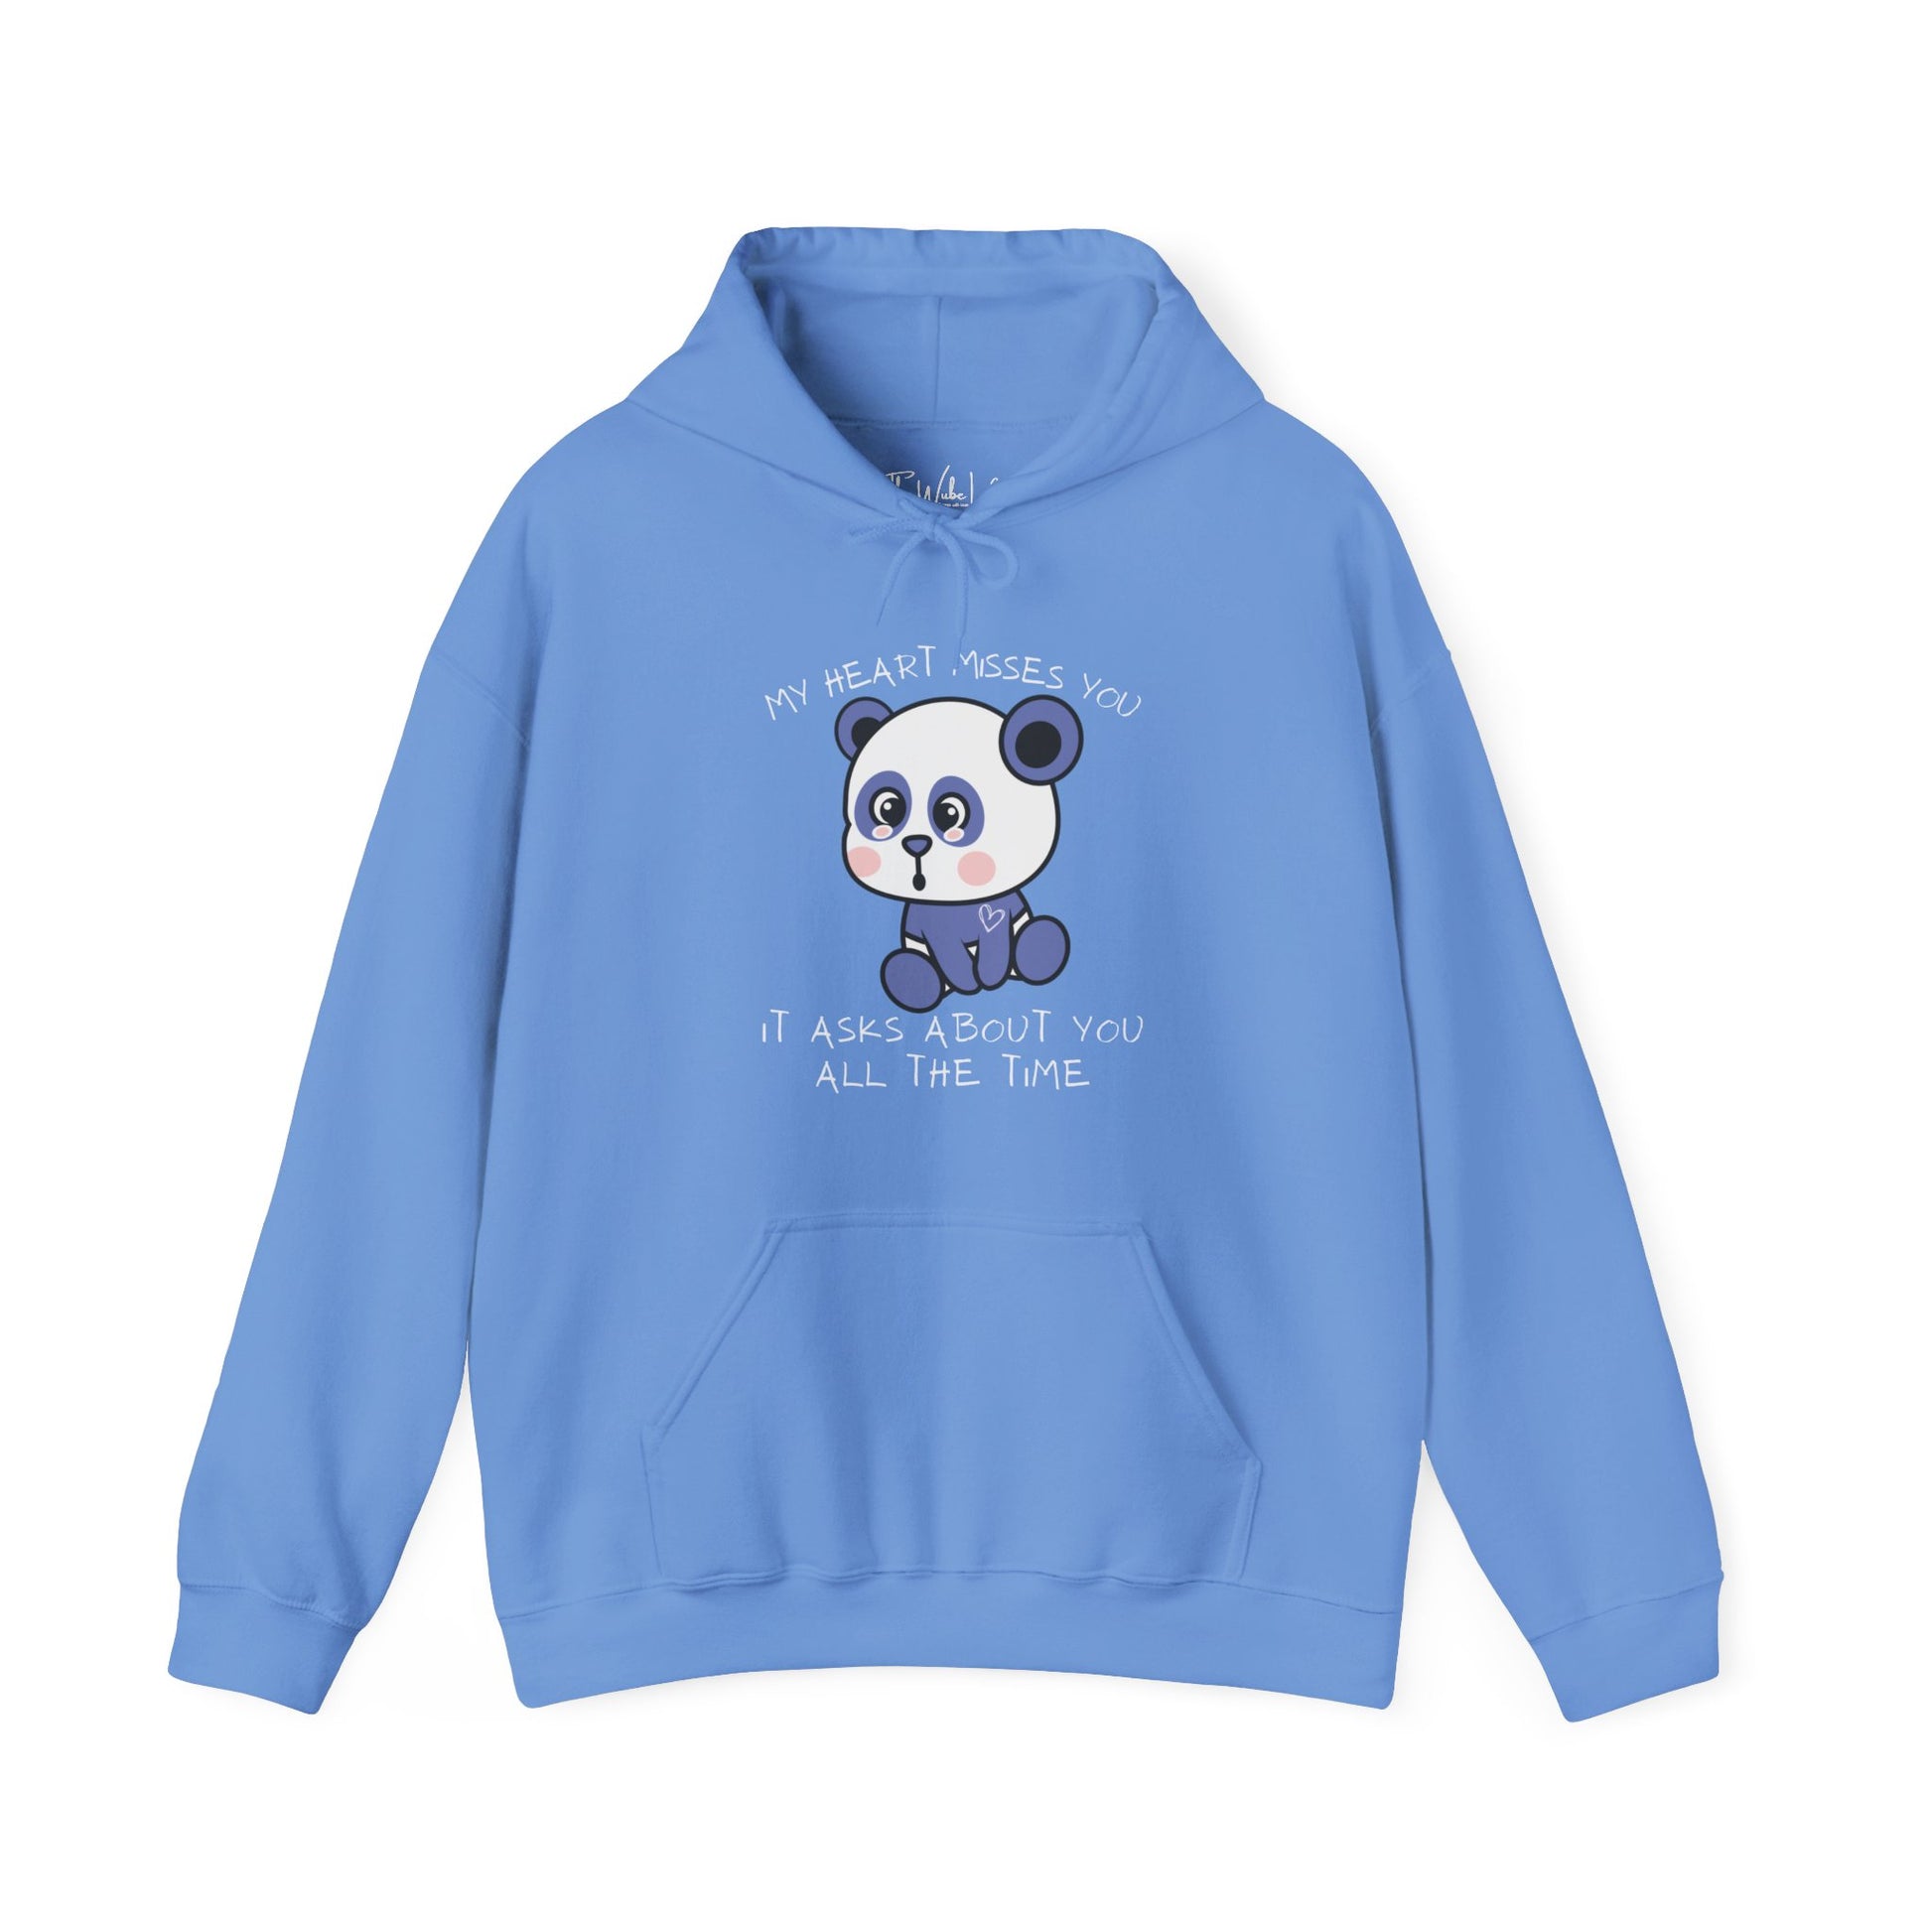 Carolina Blue Gildan 18500 Hooded Sweatshirt. Embracing memories of a lost loved one - comfort during grief. "My heart misses you, it asks about you all the time" quote with a lonely teddy bear.